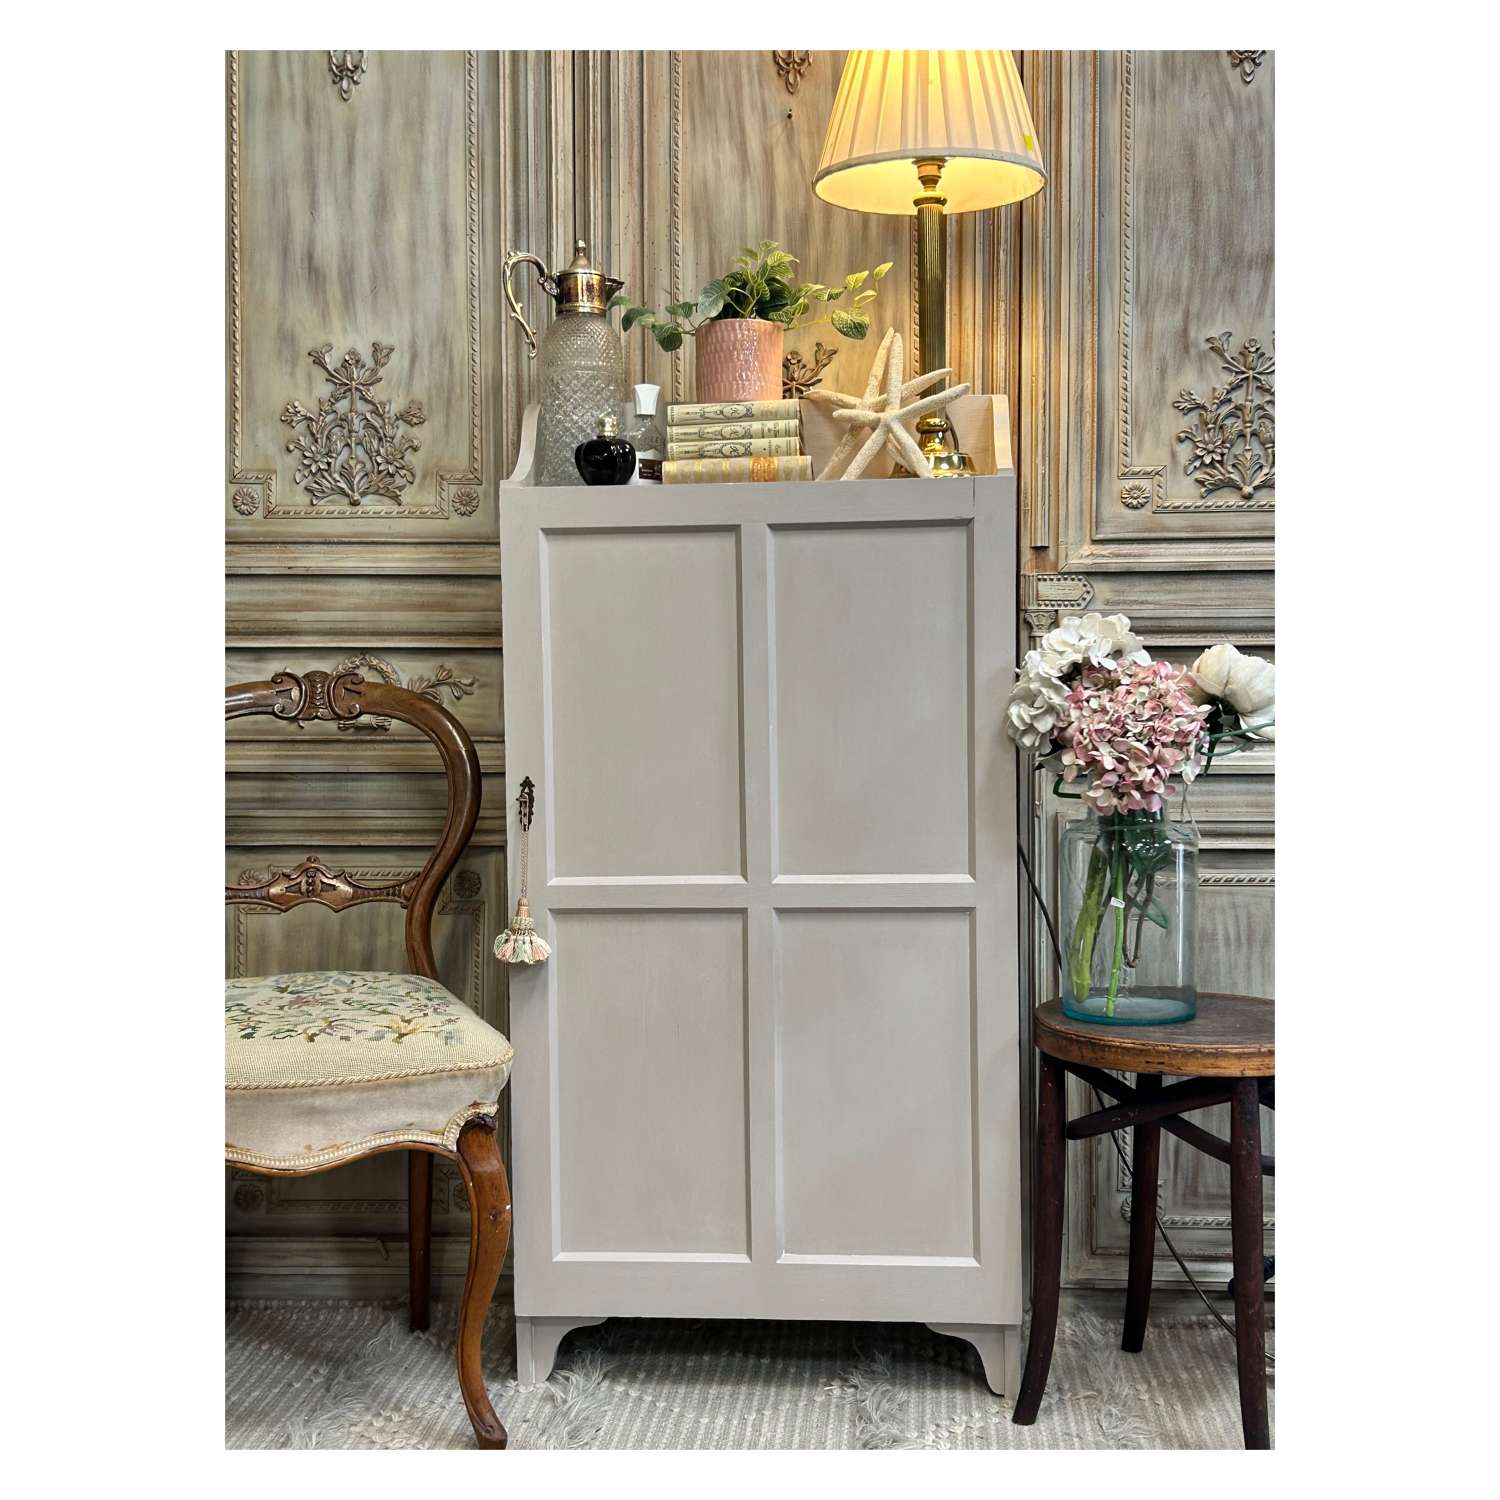 Painted Vintage Cupboard with Shelves and Key